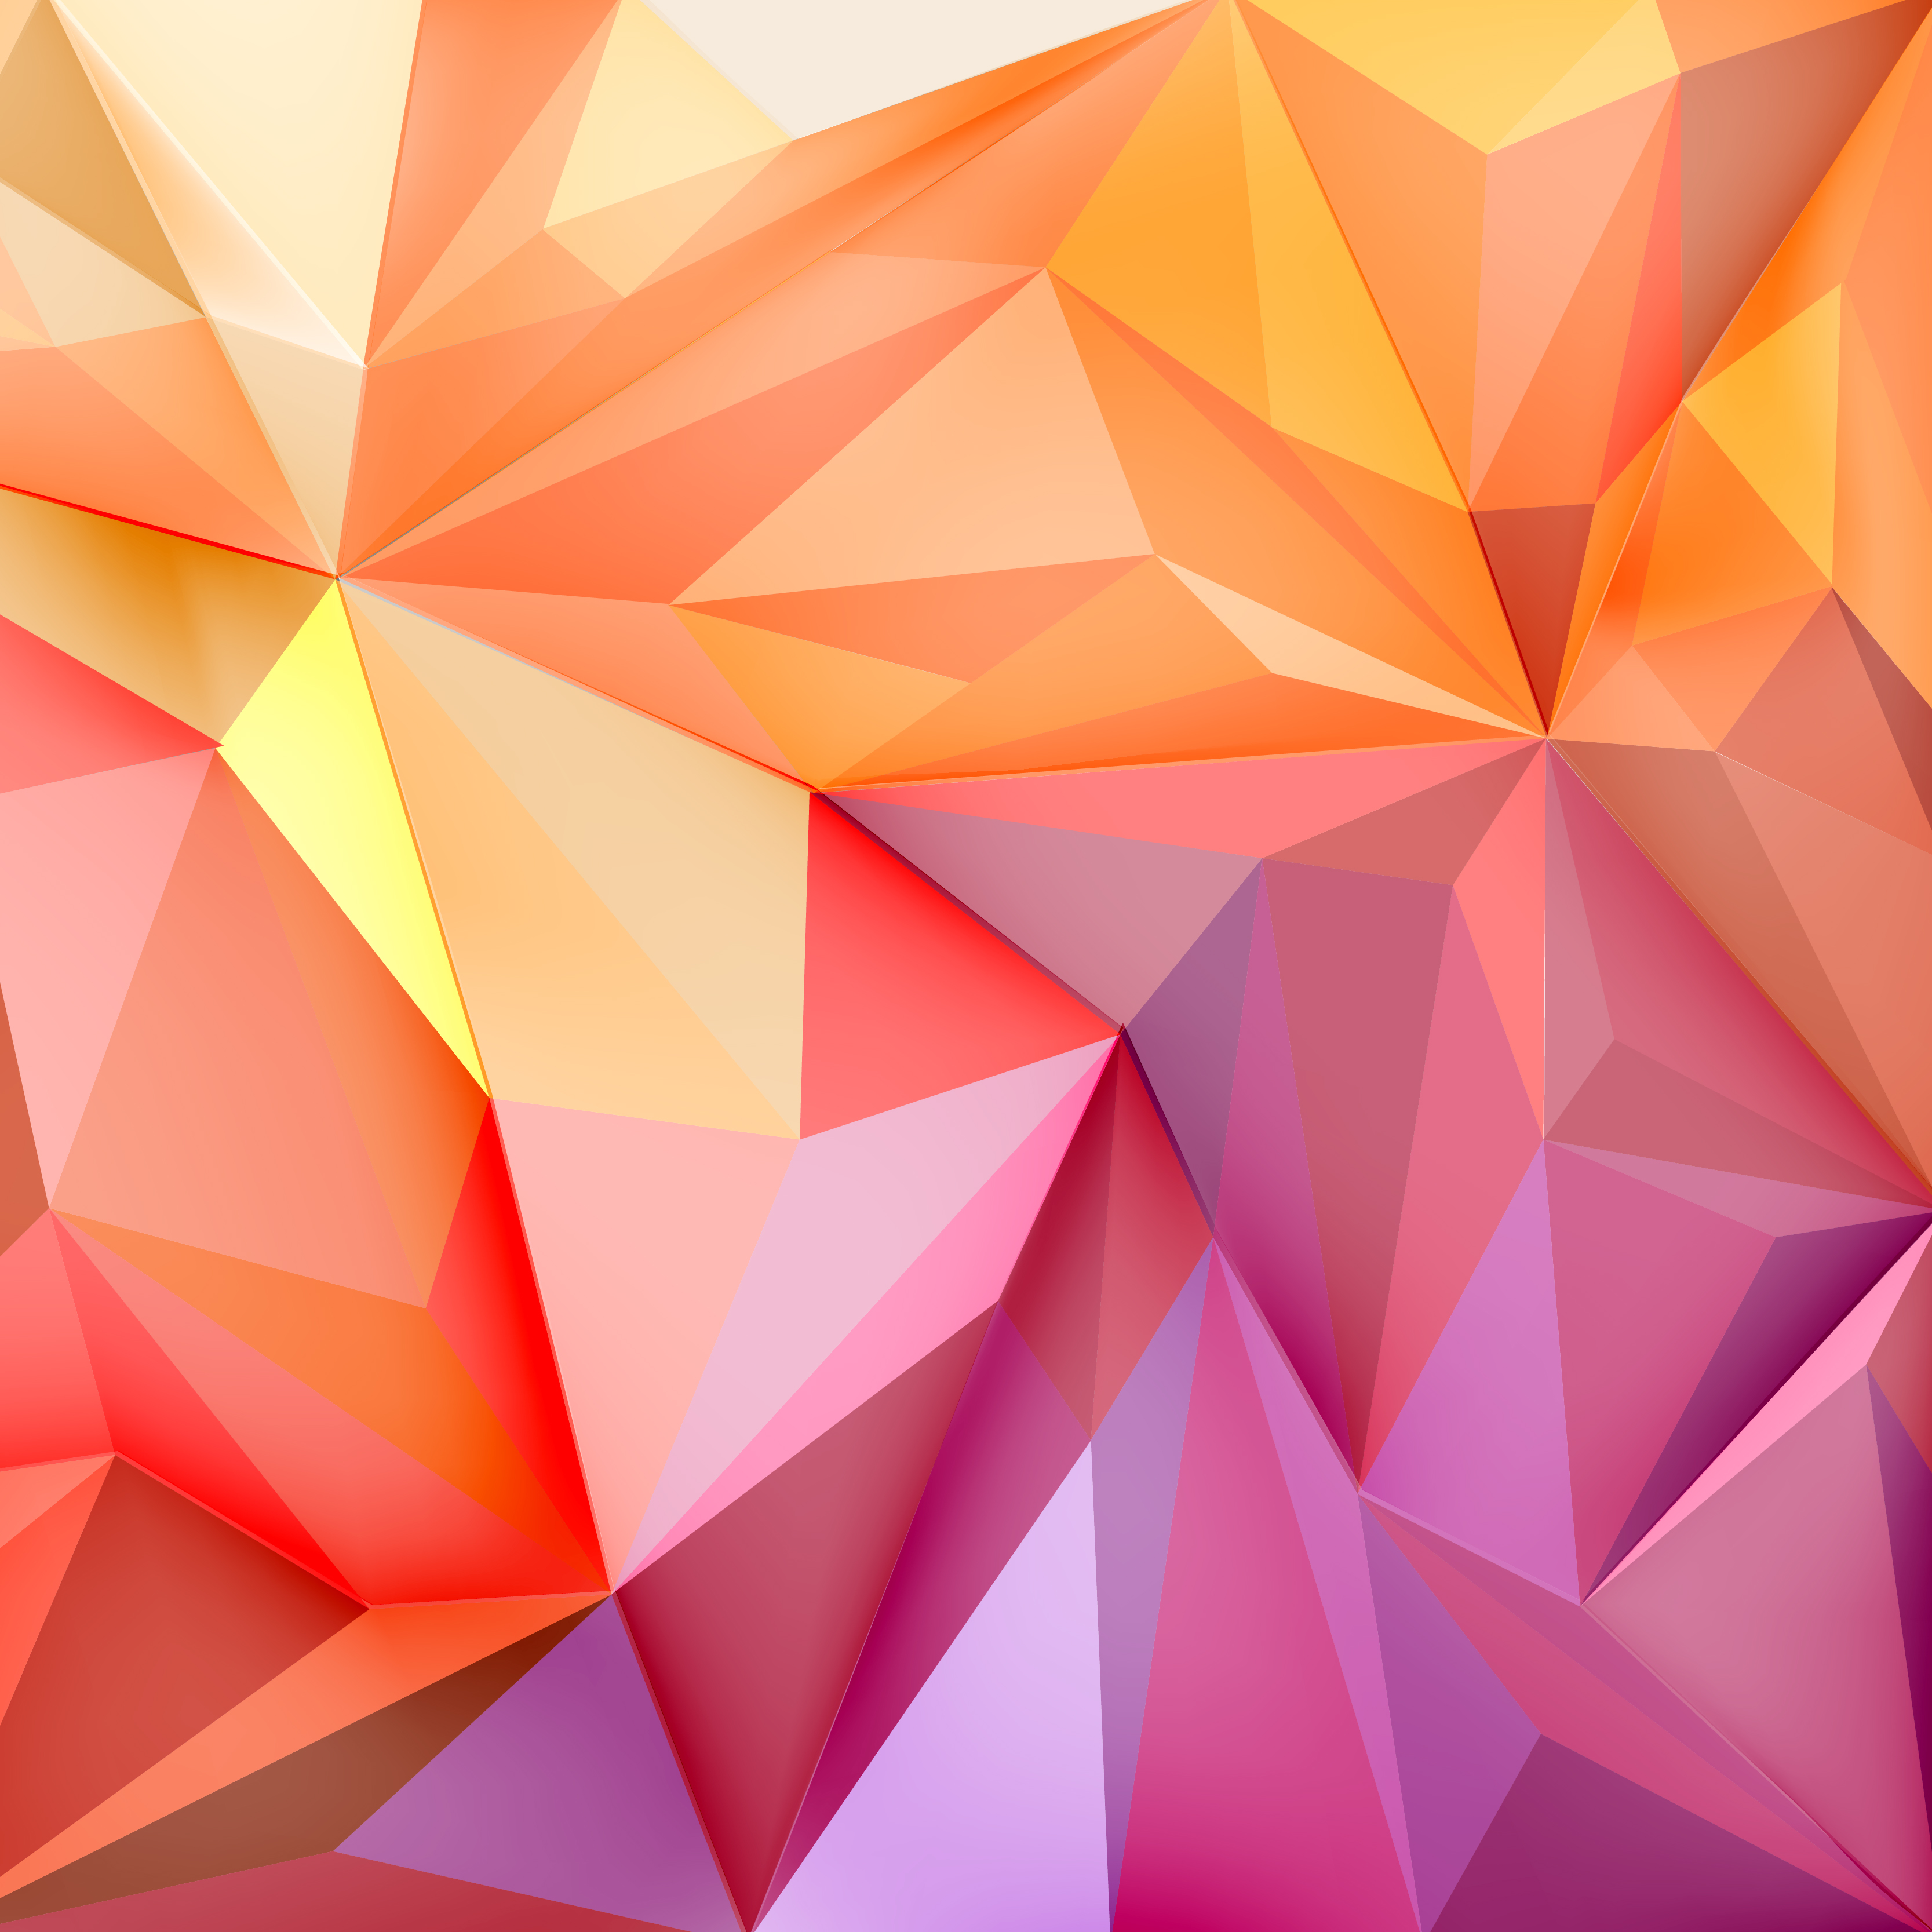  Background  wallpaper with polygons in gradient colors 